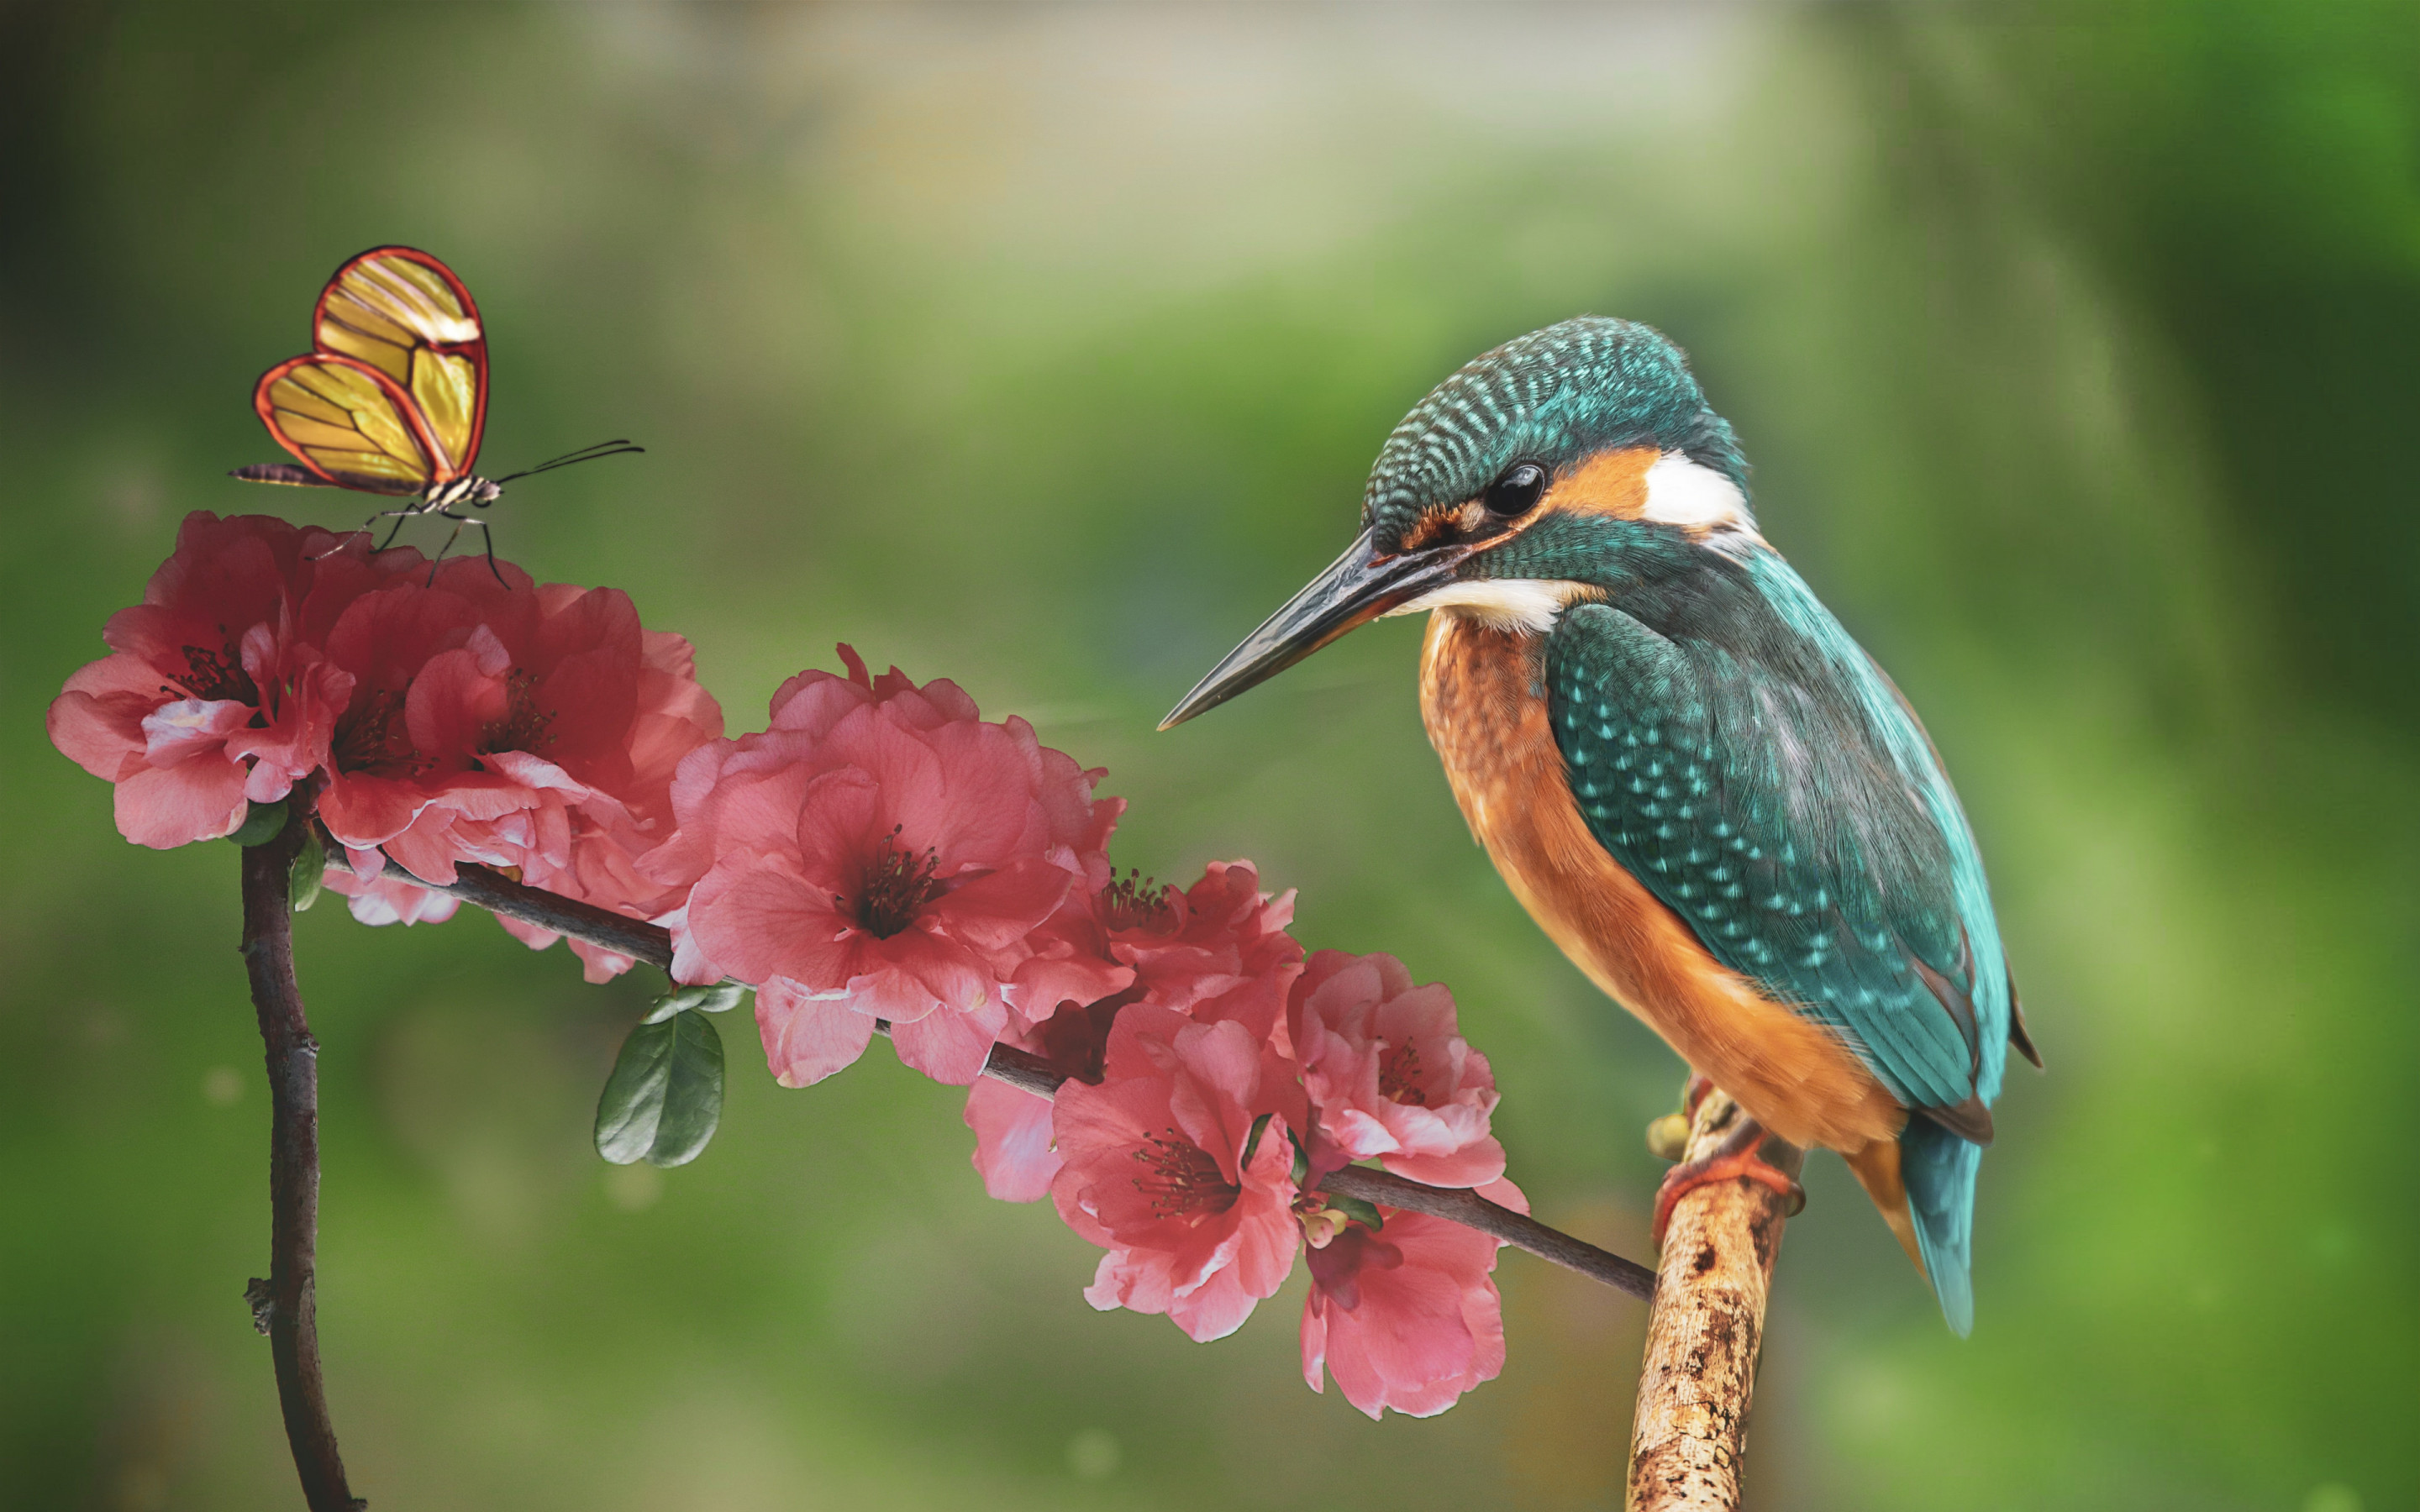 Kingfisher and the butterfly wallpaper 2880x1800